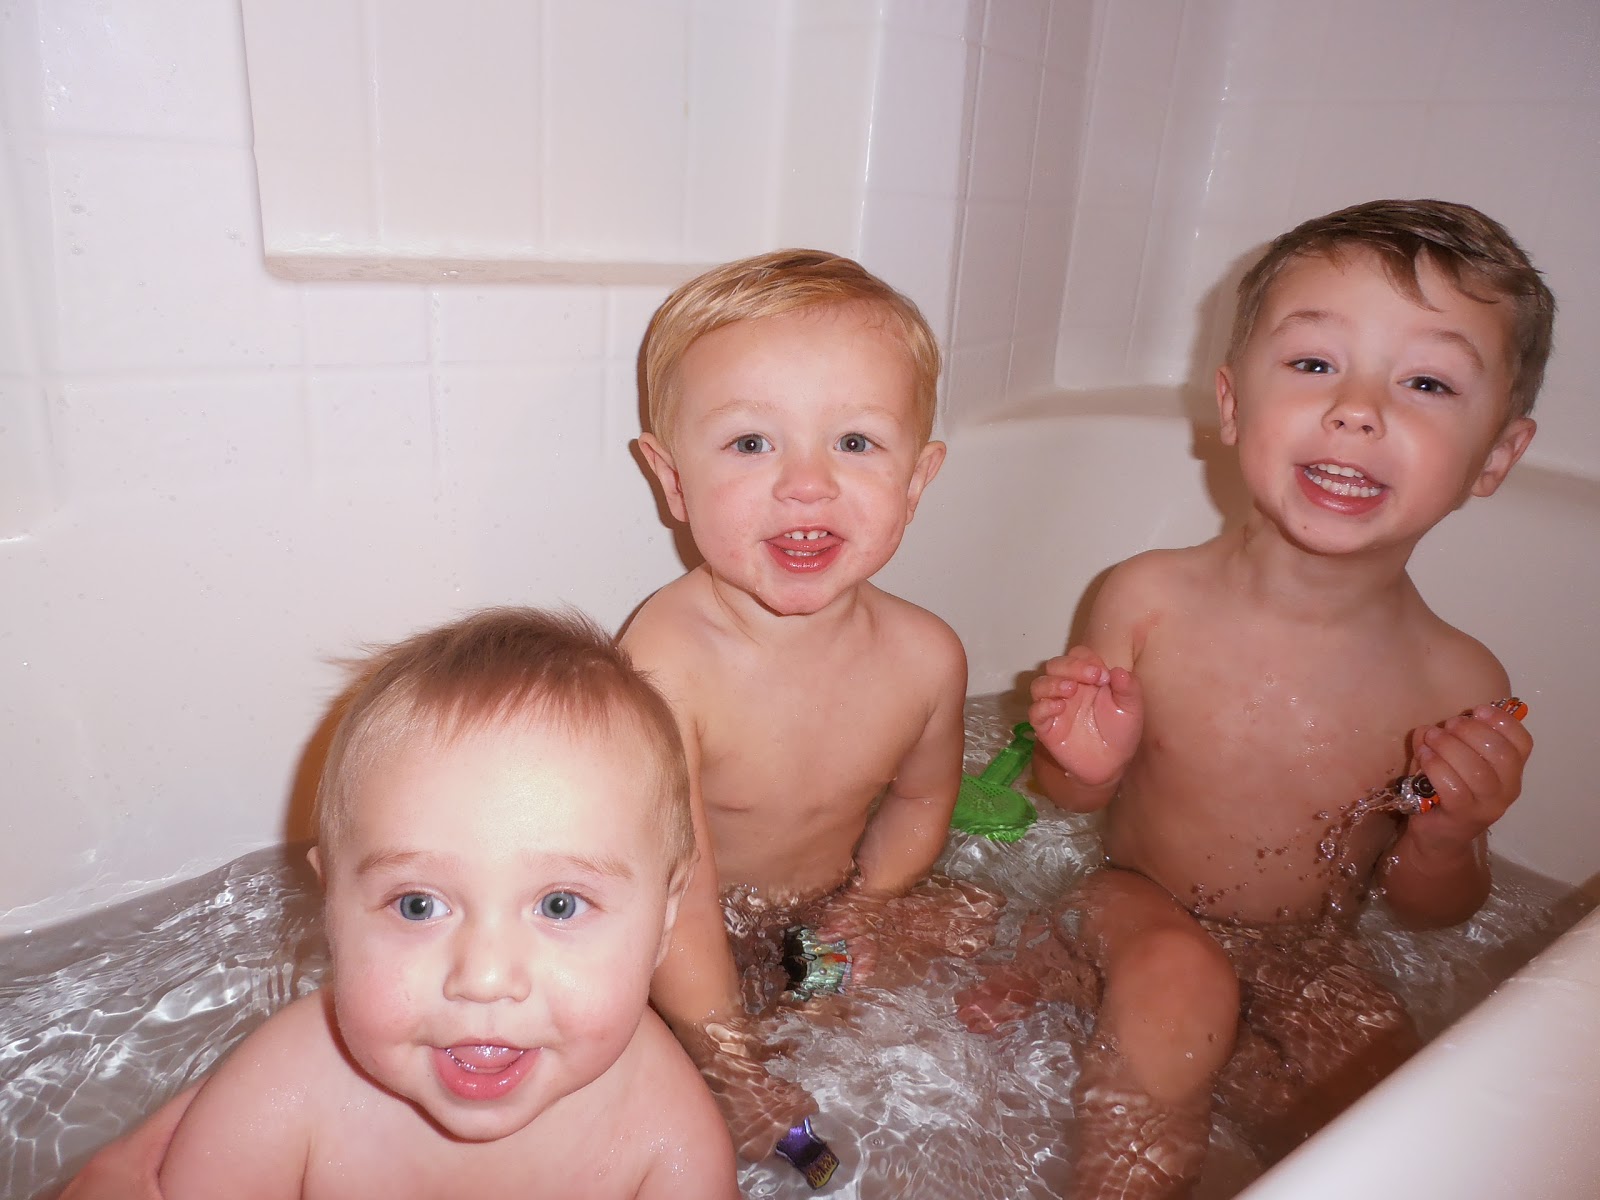 Took these of the boys last night in the bathtub